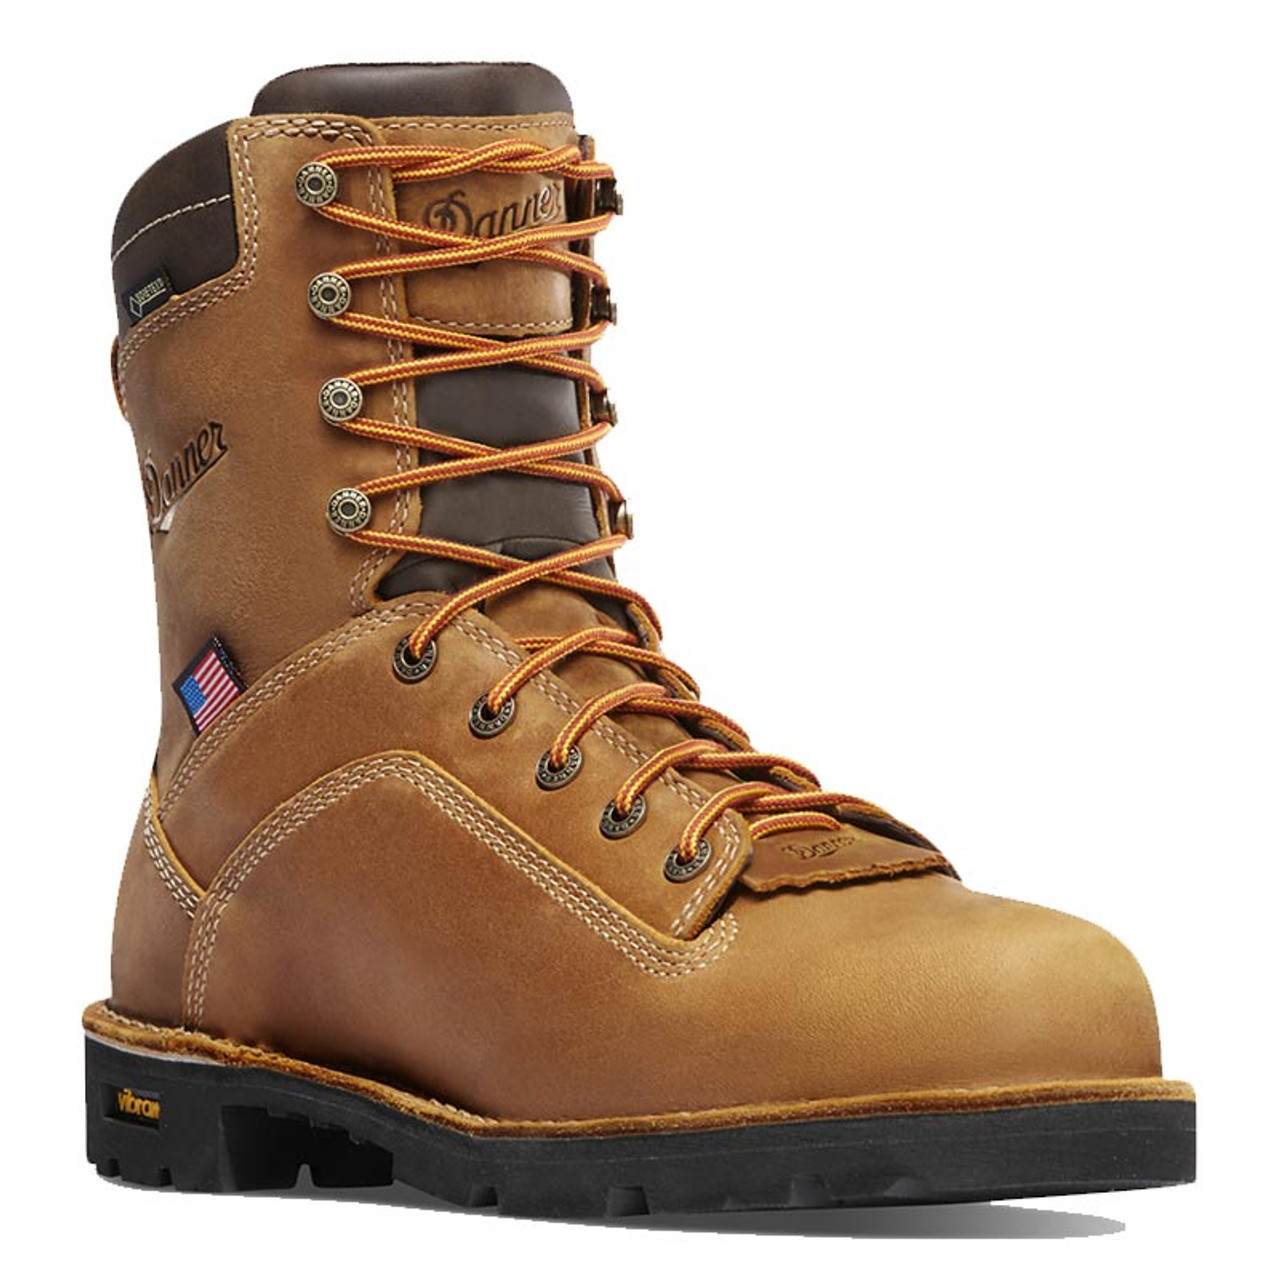 gore tex insulated work boots